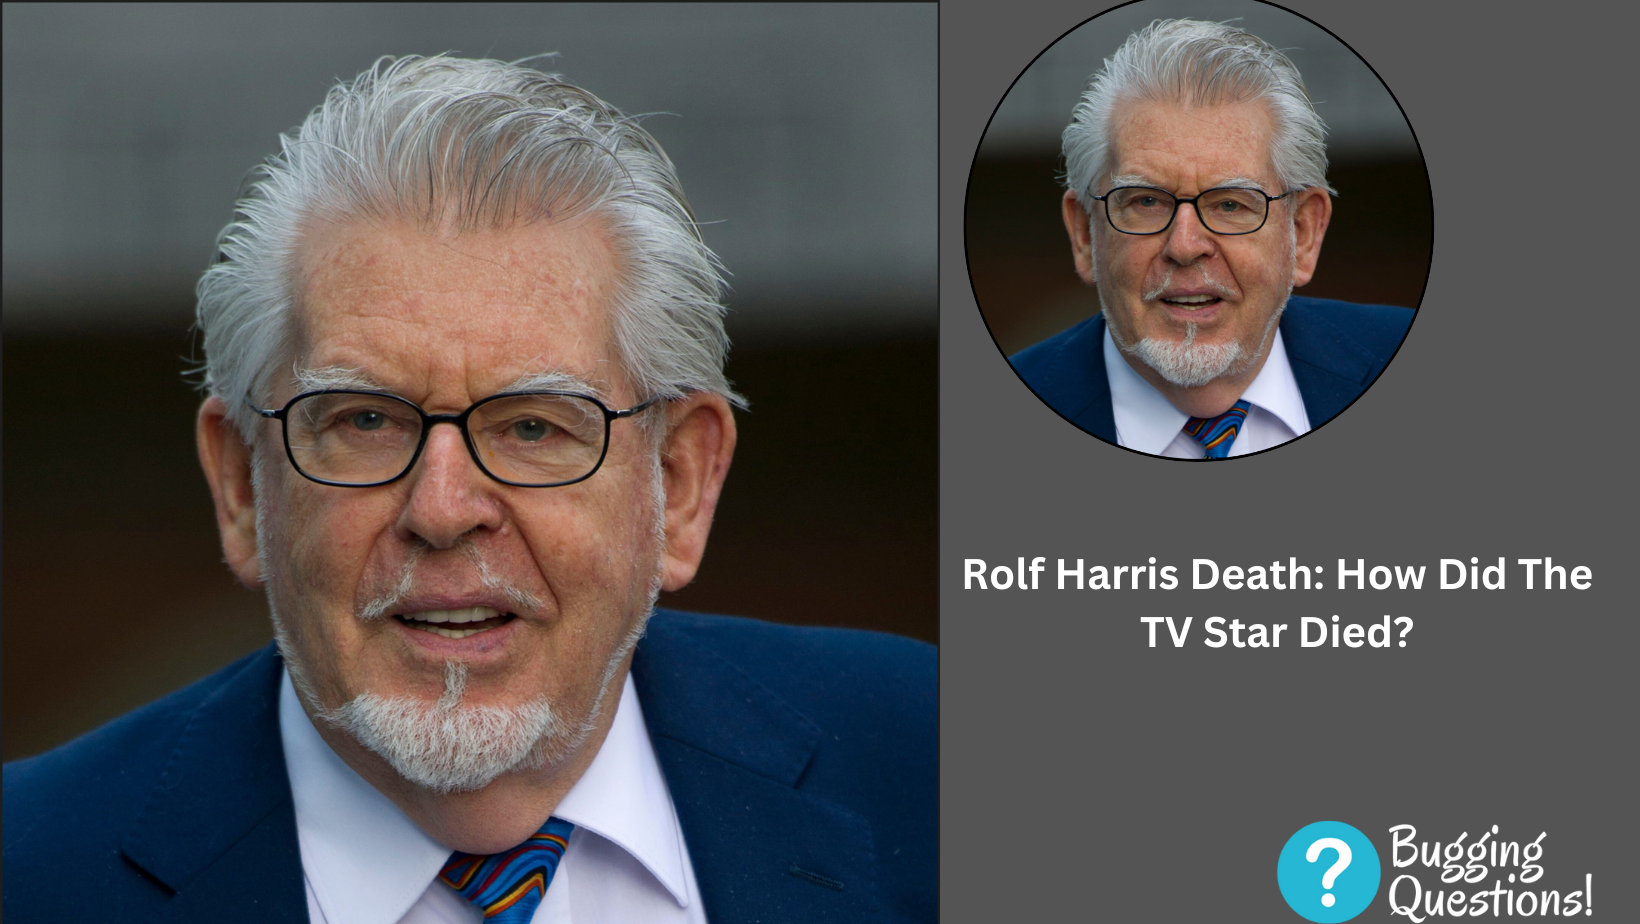 Rolf Harris Death: How Did The TV Star Died?